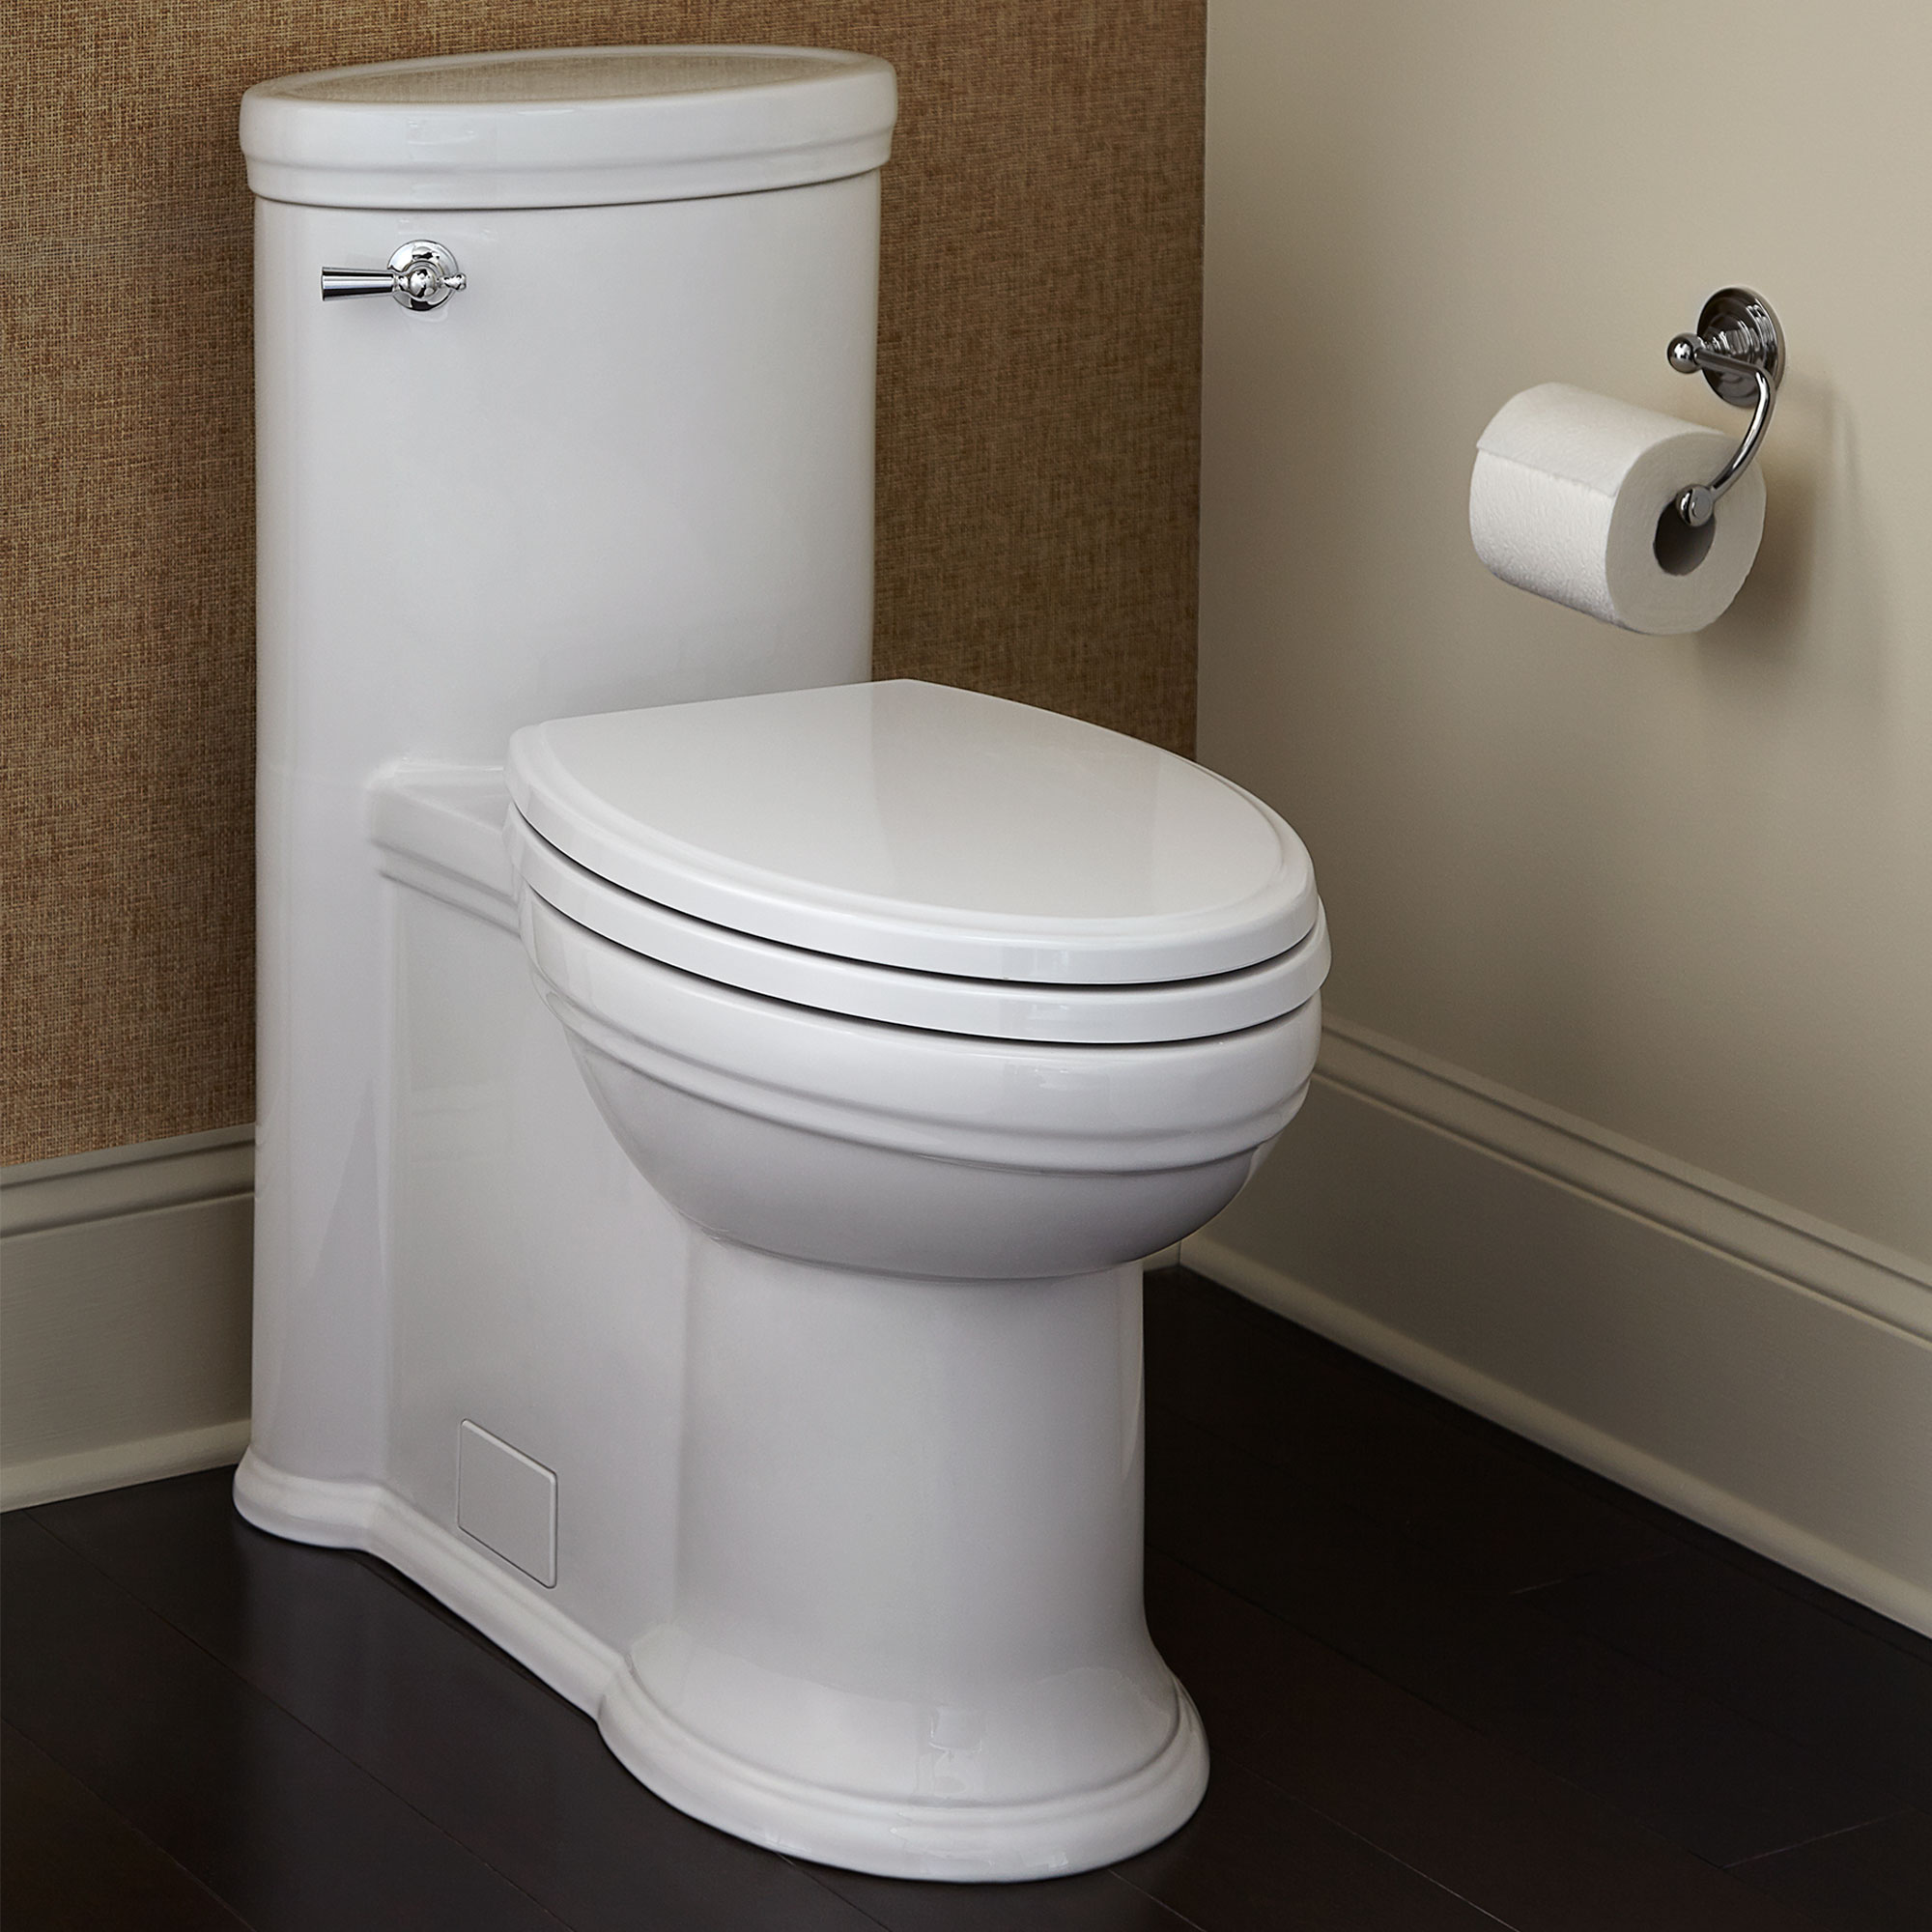 St. George® One-Piece Chair-Height Elongated Toilet with Seat